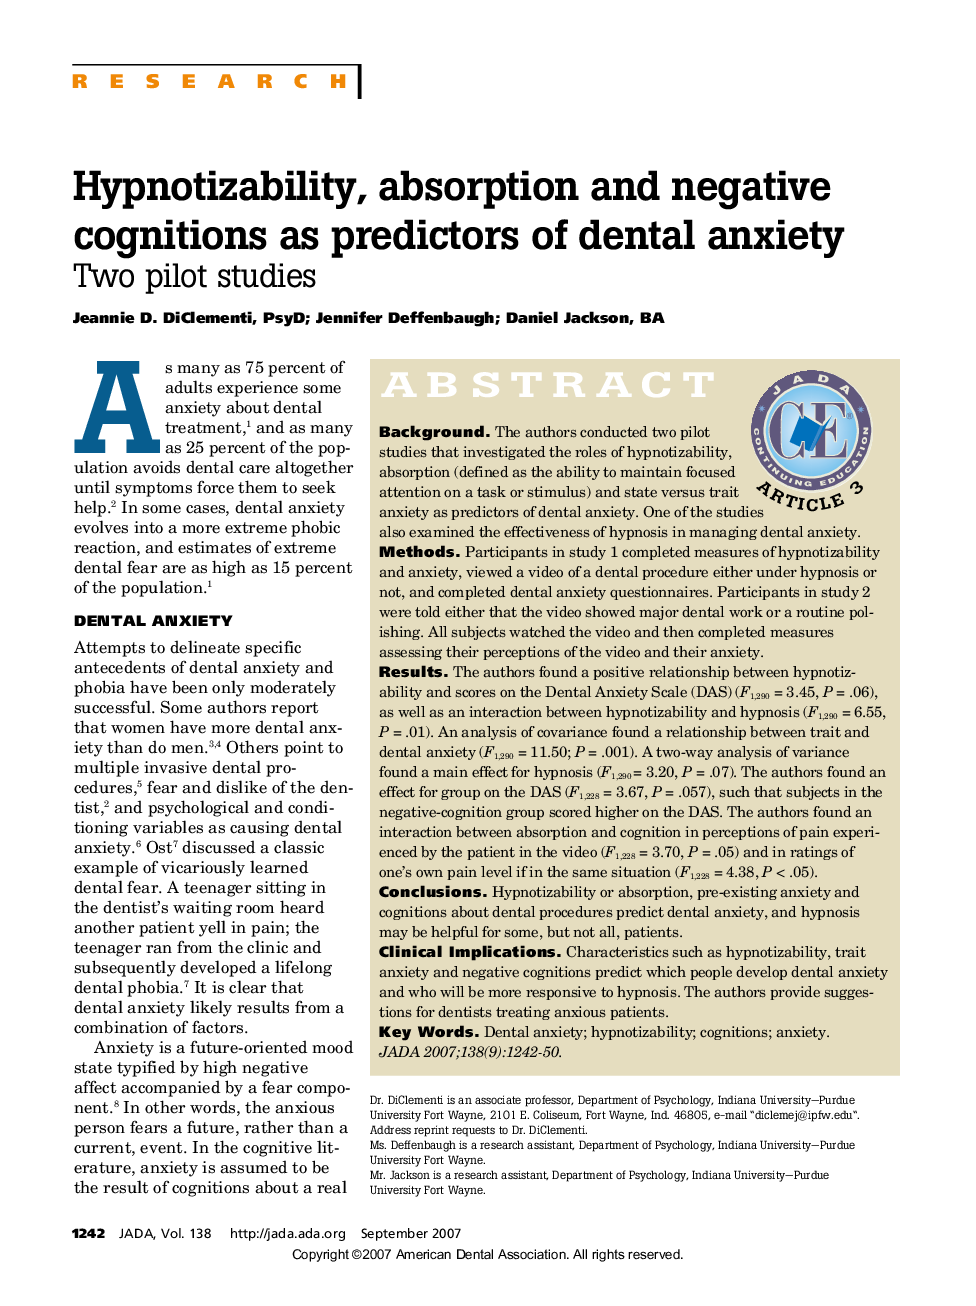 Hypnotizability, Absorption and Negative Cognitions as Predictors of Dental Anxiety